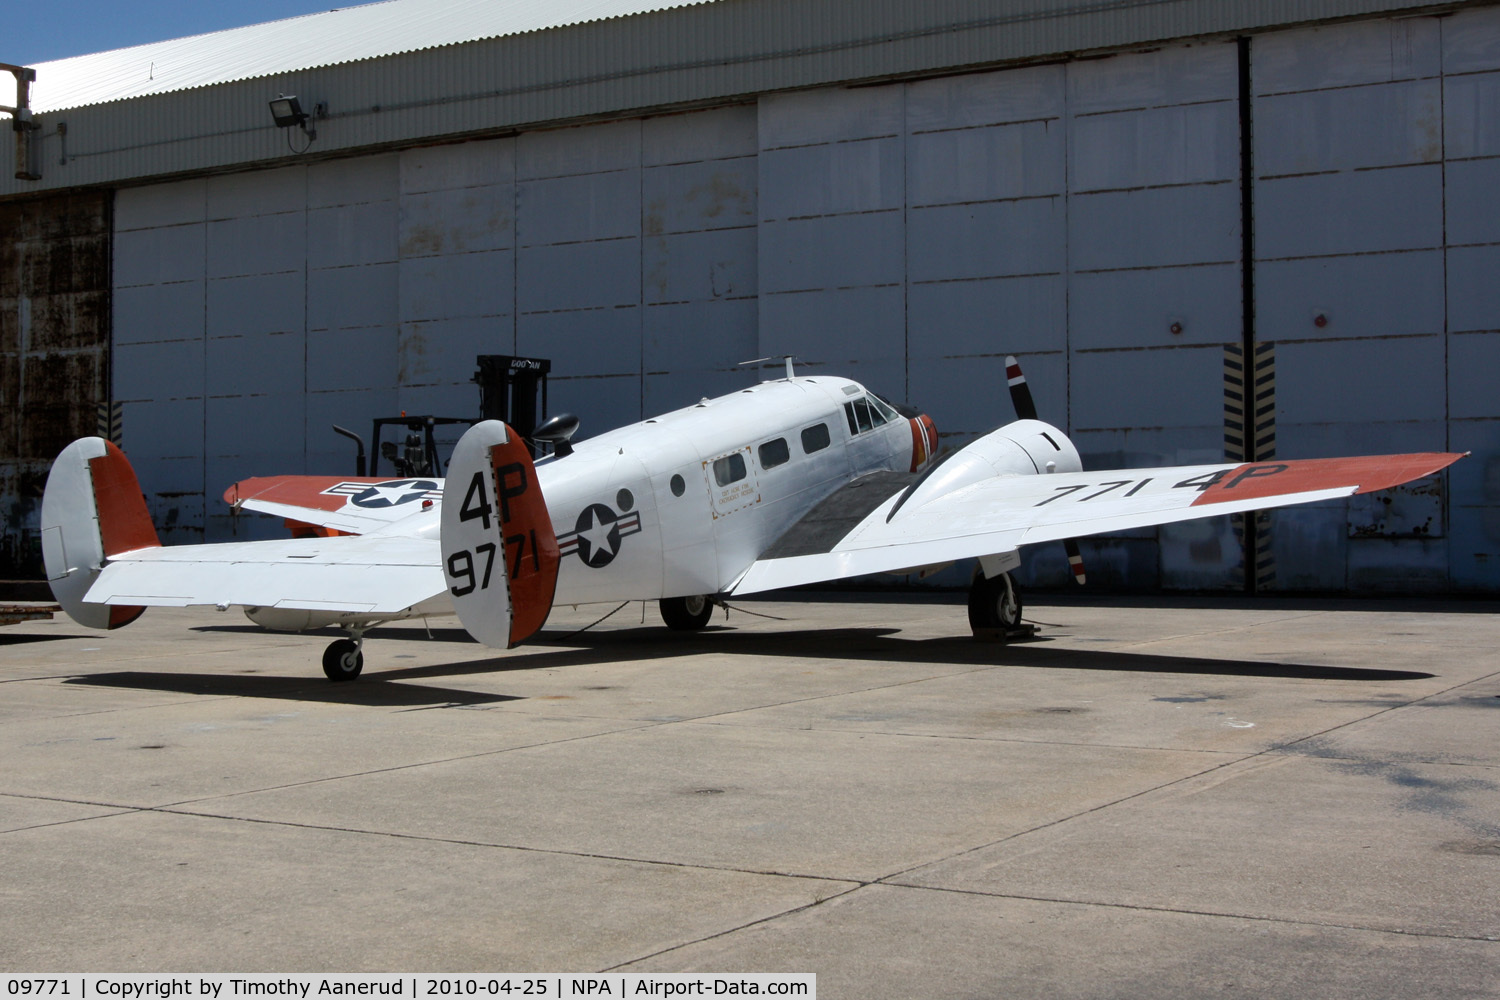 09771, Beechcraft RC-45J Expeditor C/N 434, Beech JRB-1 Expeditor, Ex NC1040, impressed by Navy